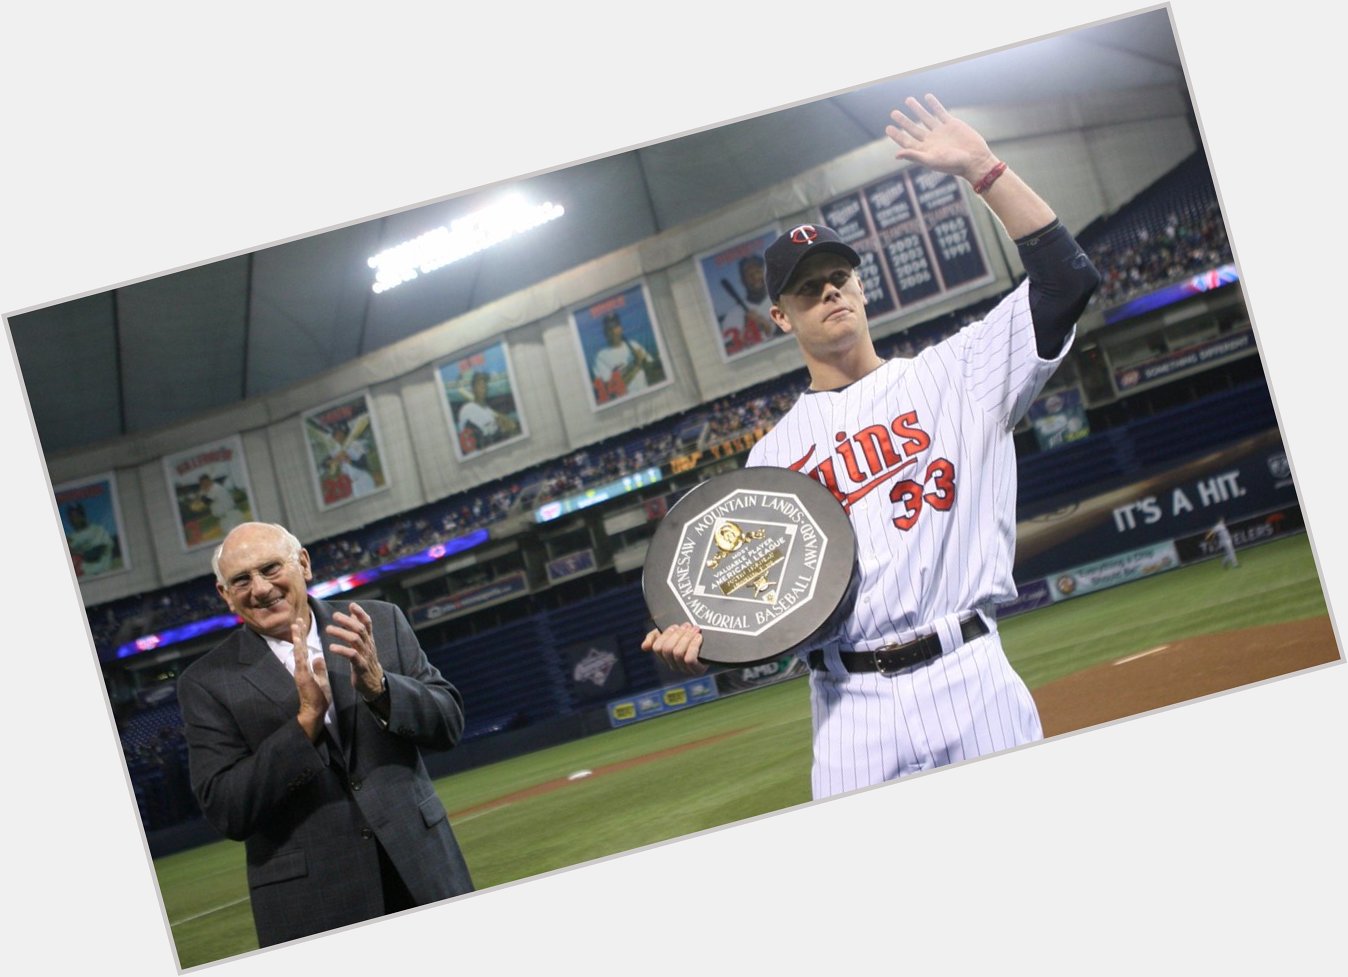 Let\s all wish a happy 36th birthday to former first baseman Justin Morneau.  